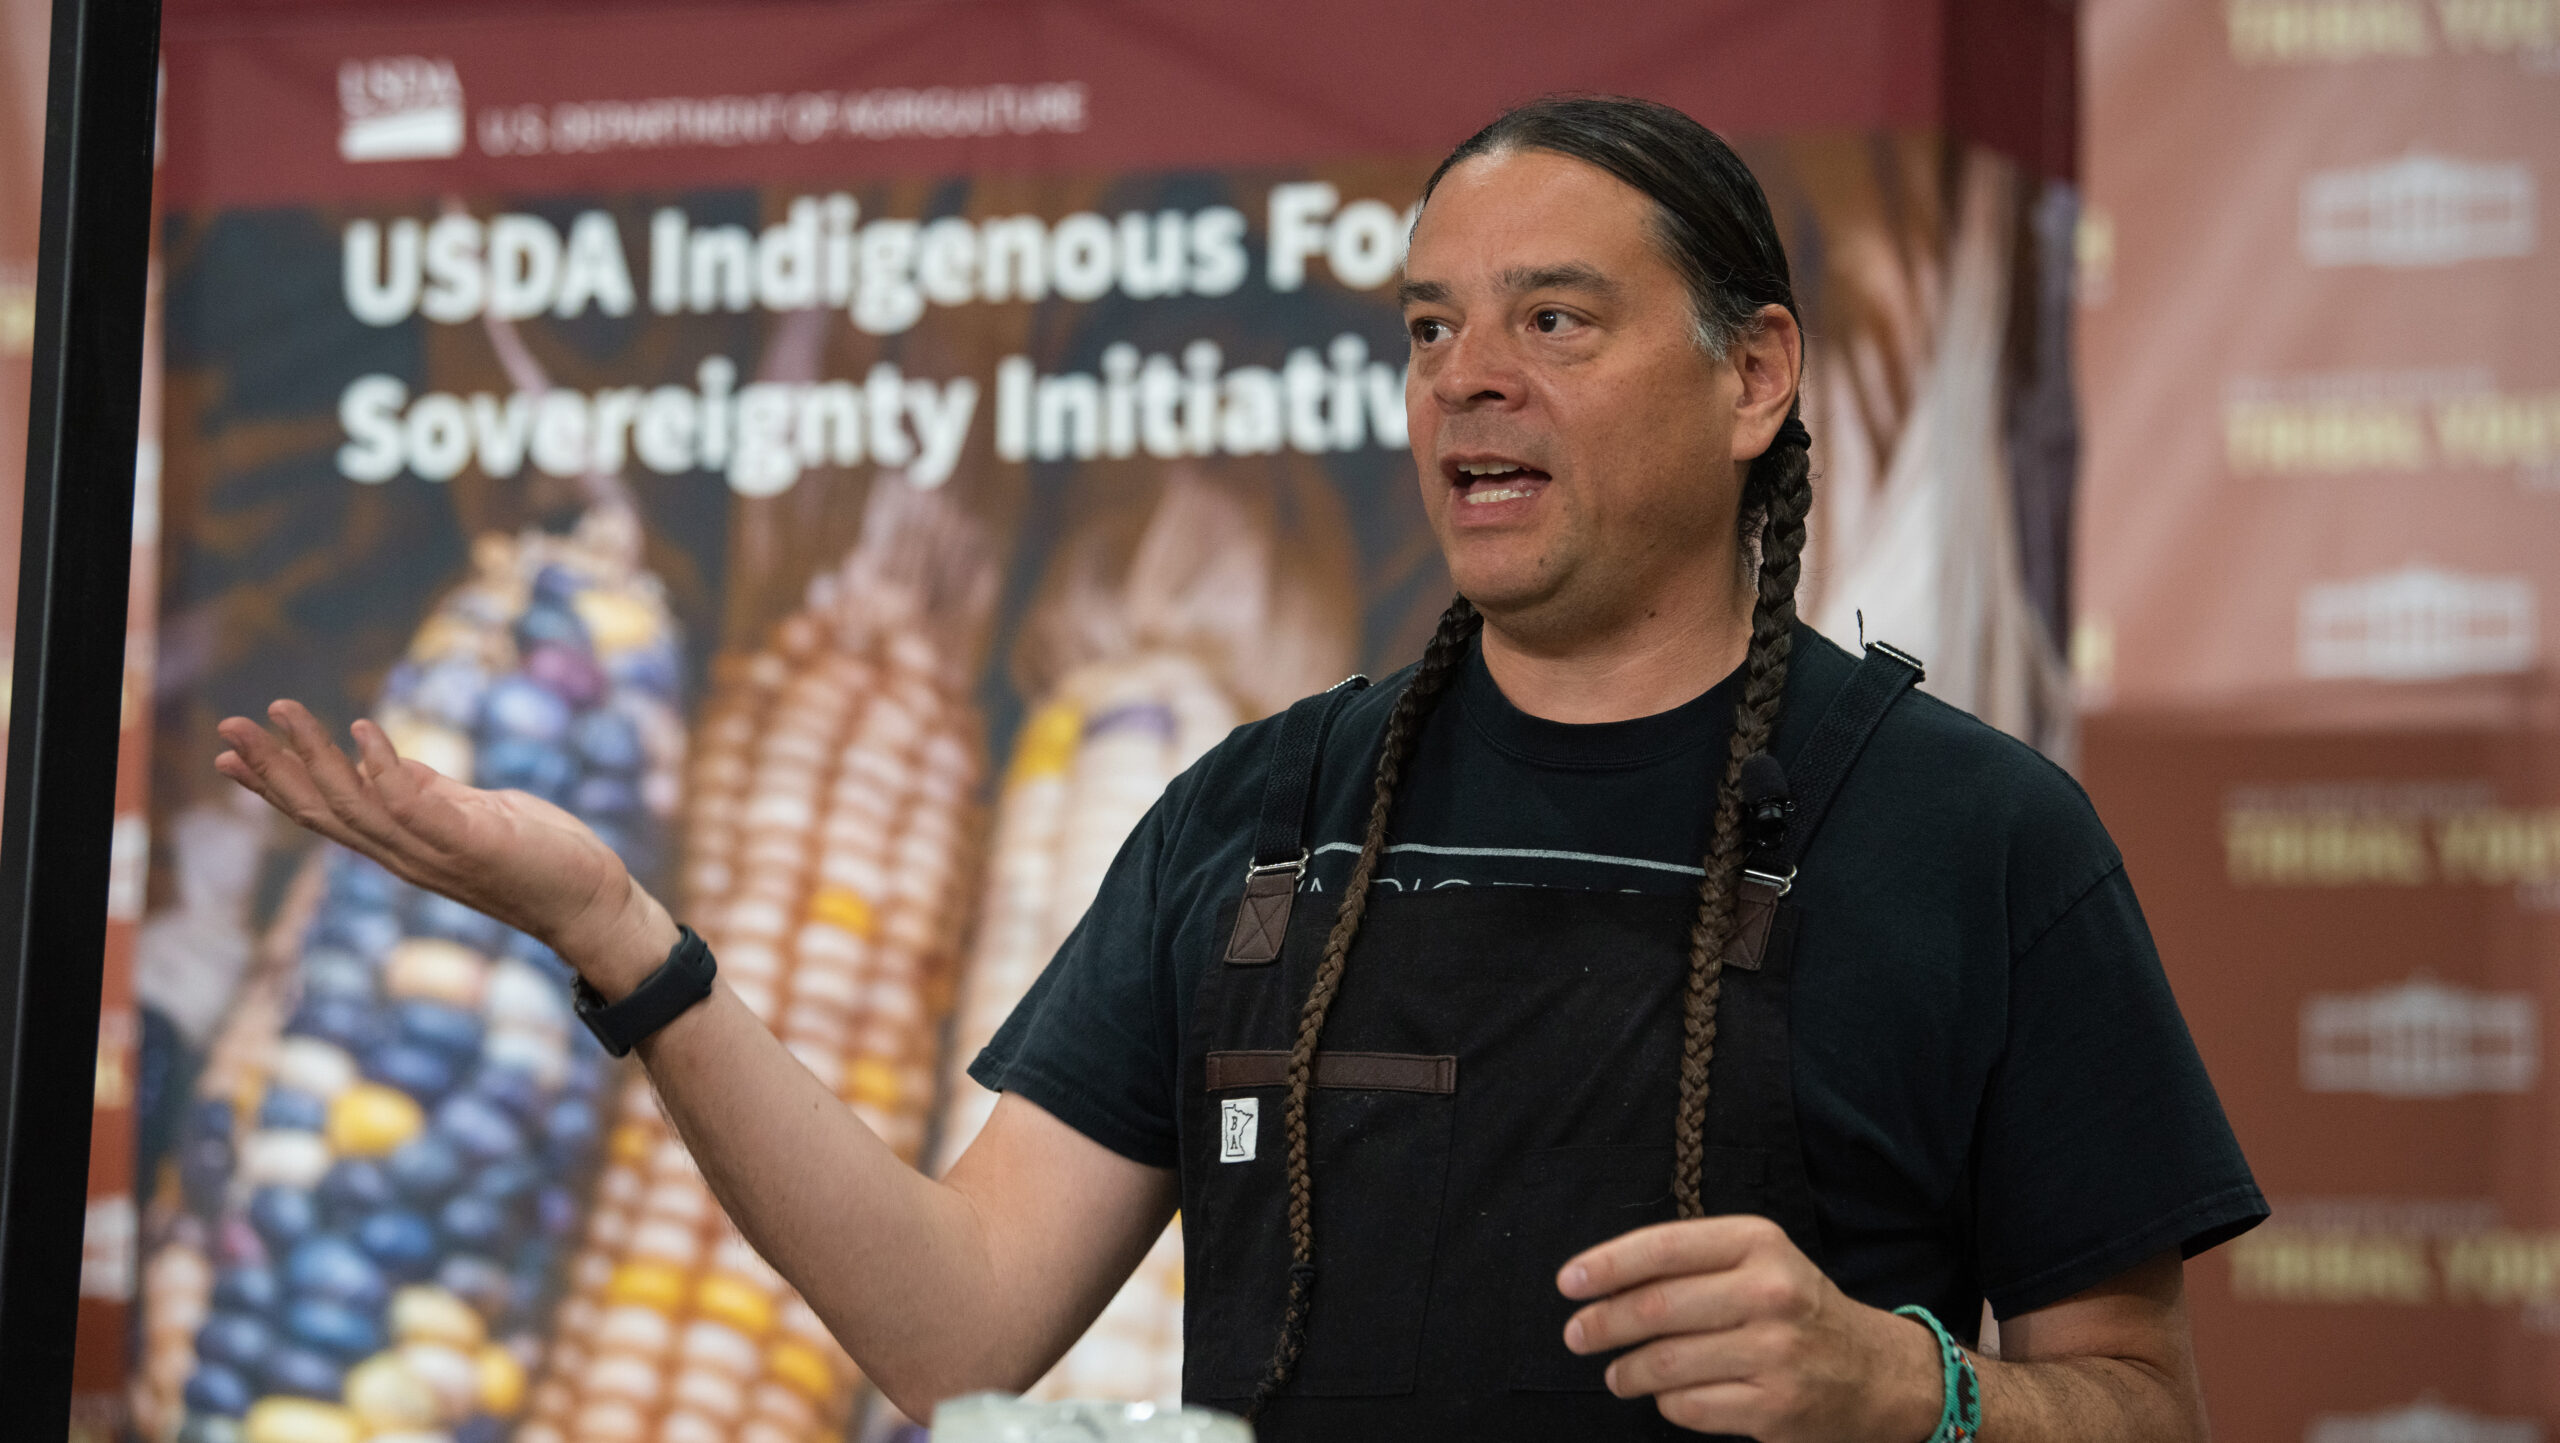 Chef Sean Sherman speaks in front of a sign that says “USDA Indigenous Food Sovereignty Initiative”